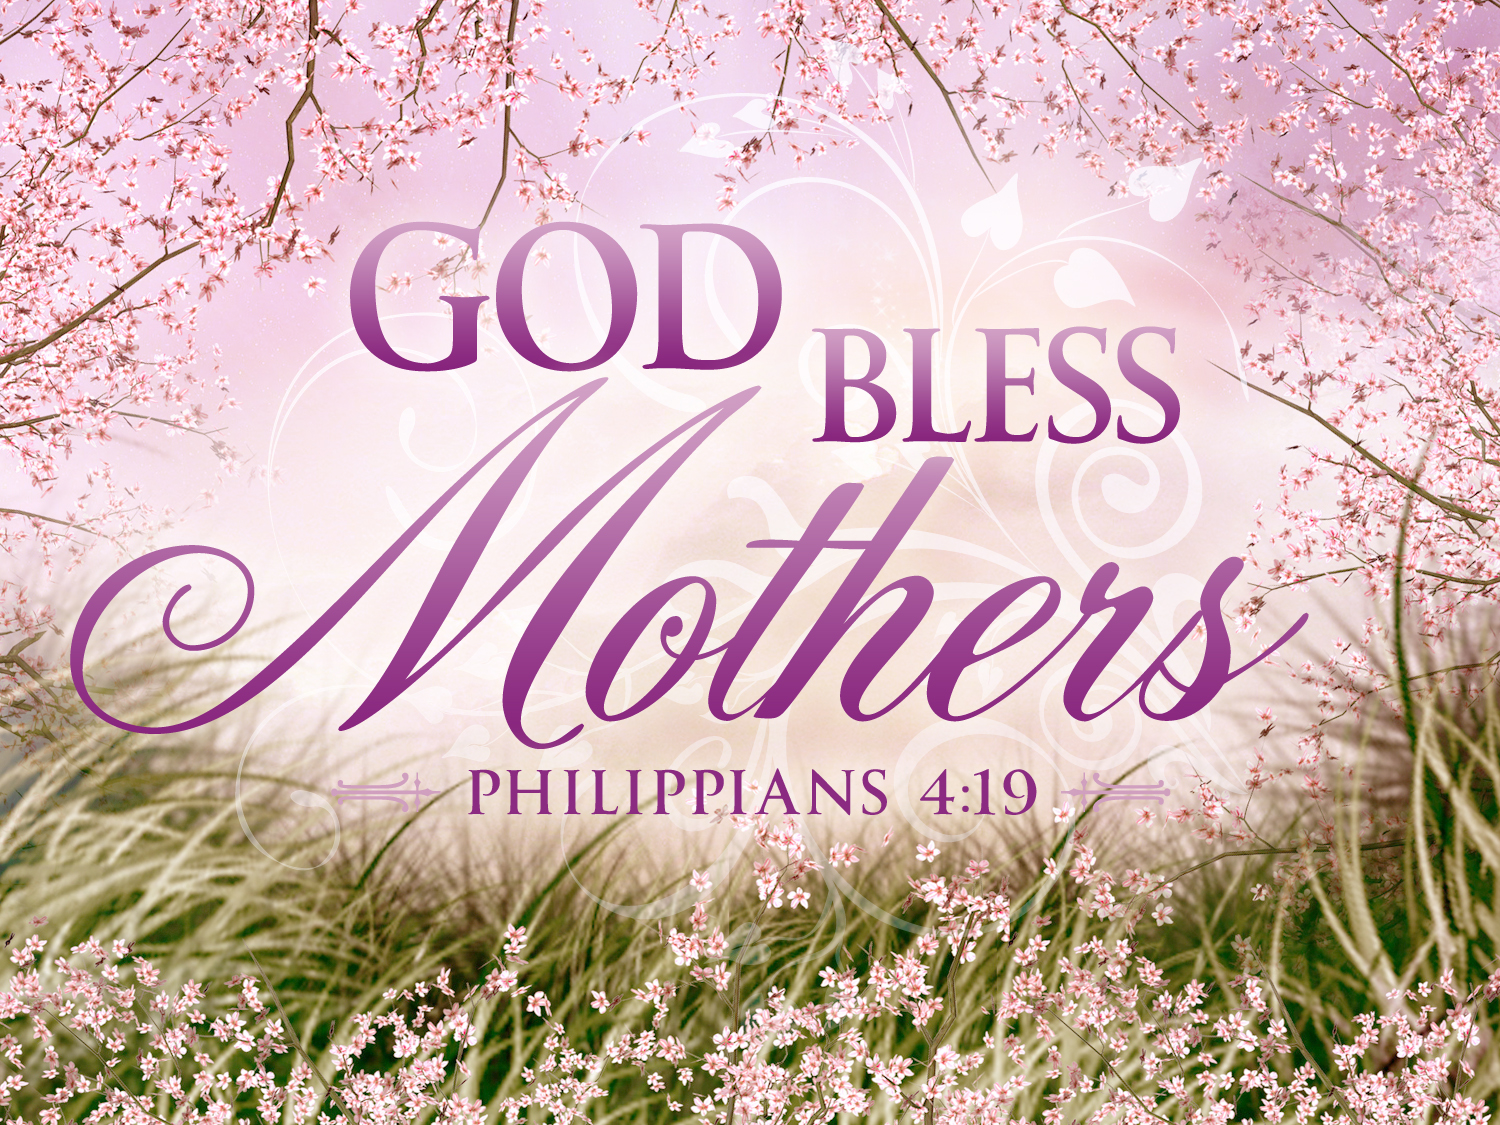 Are And All You Do A Blessed Mother S Day To All From The Church Of St